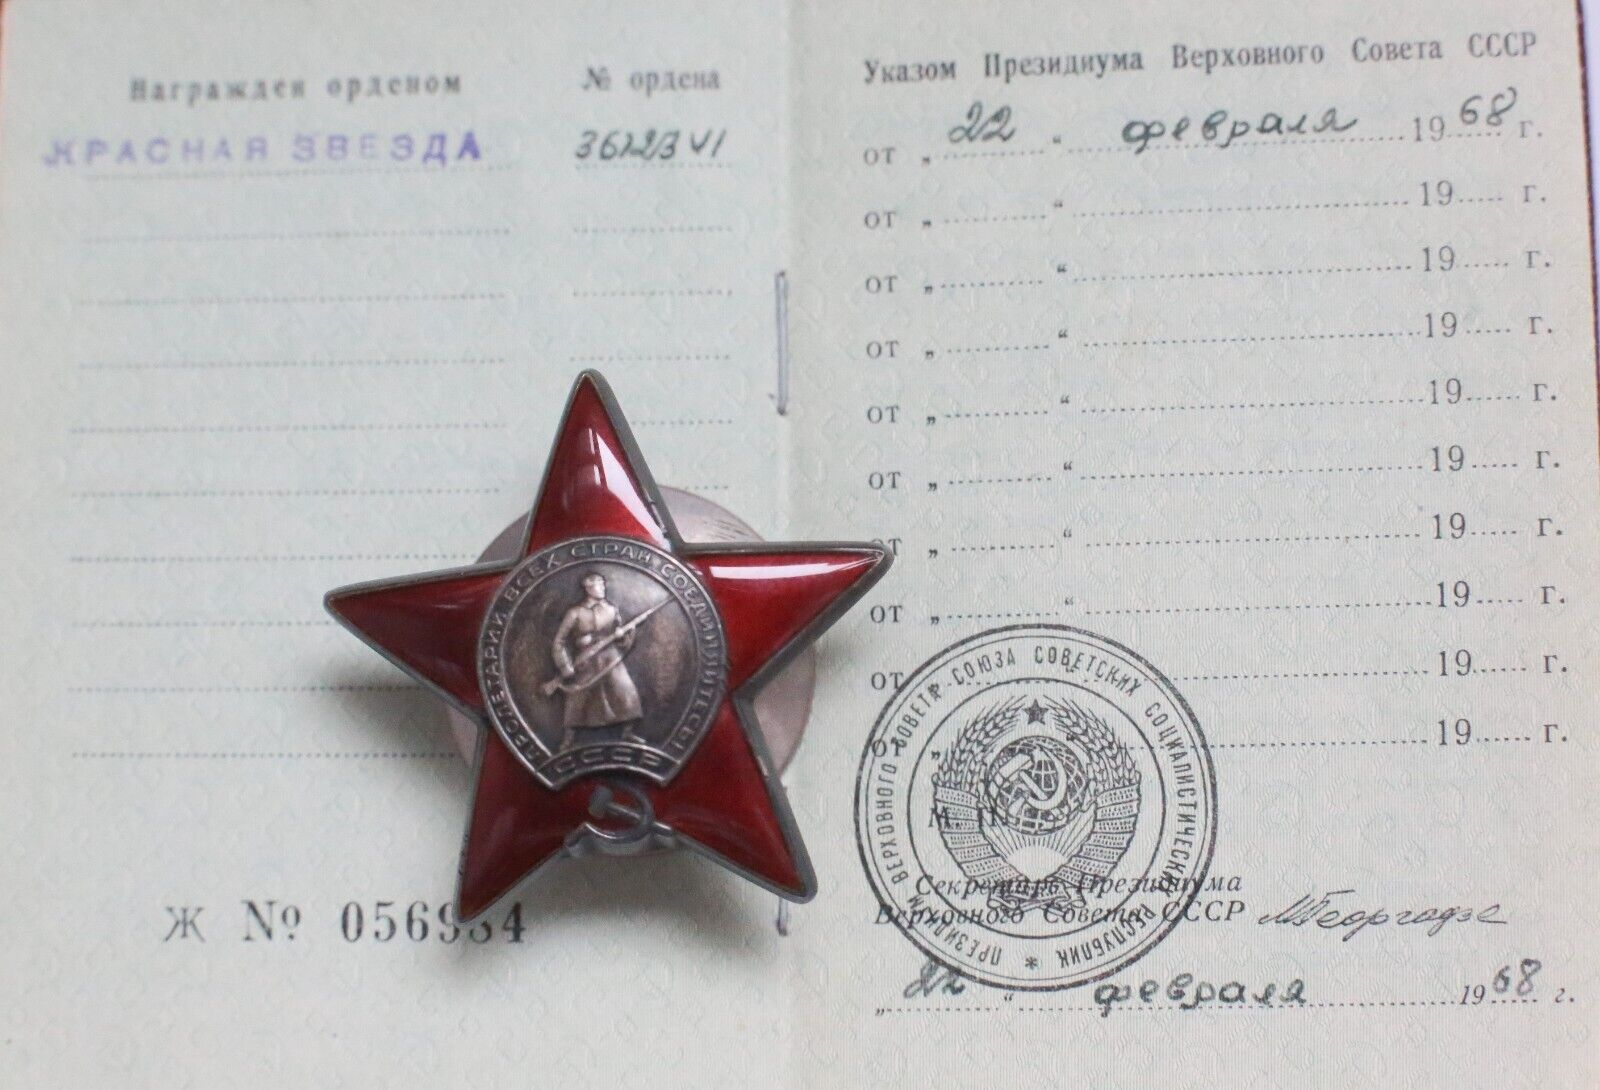 Soviet Russian Order of the Red Star Original 1968 invasion of Czechoslovakia